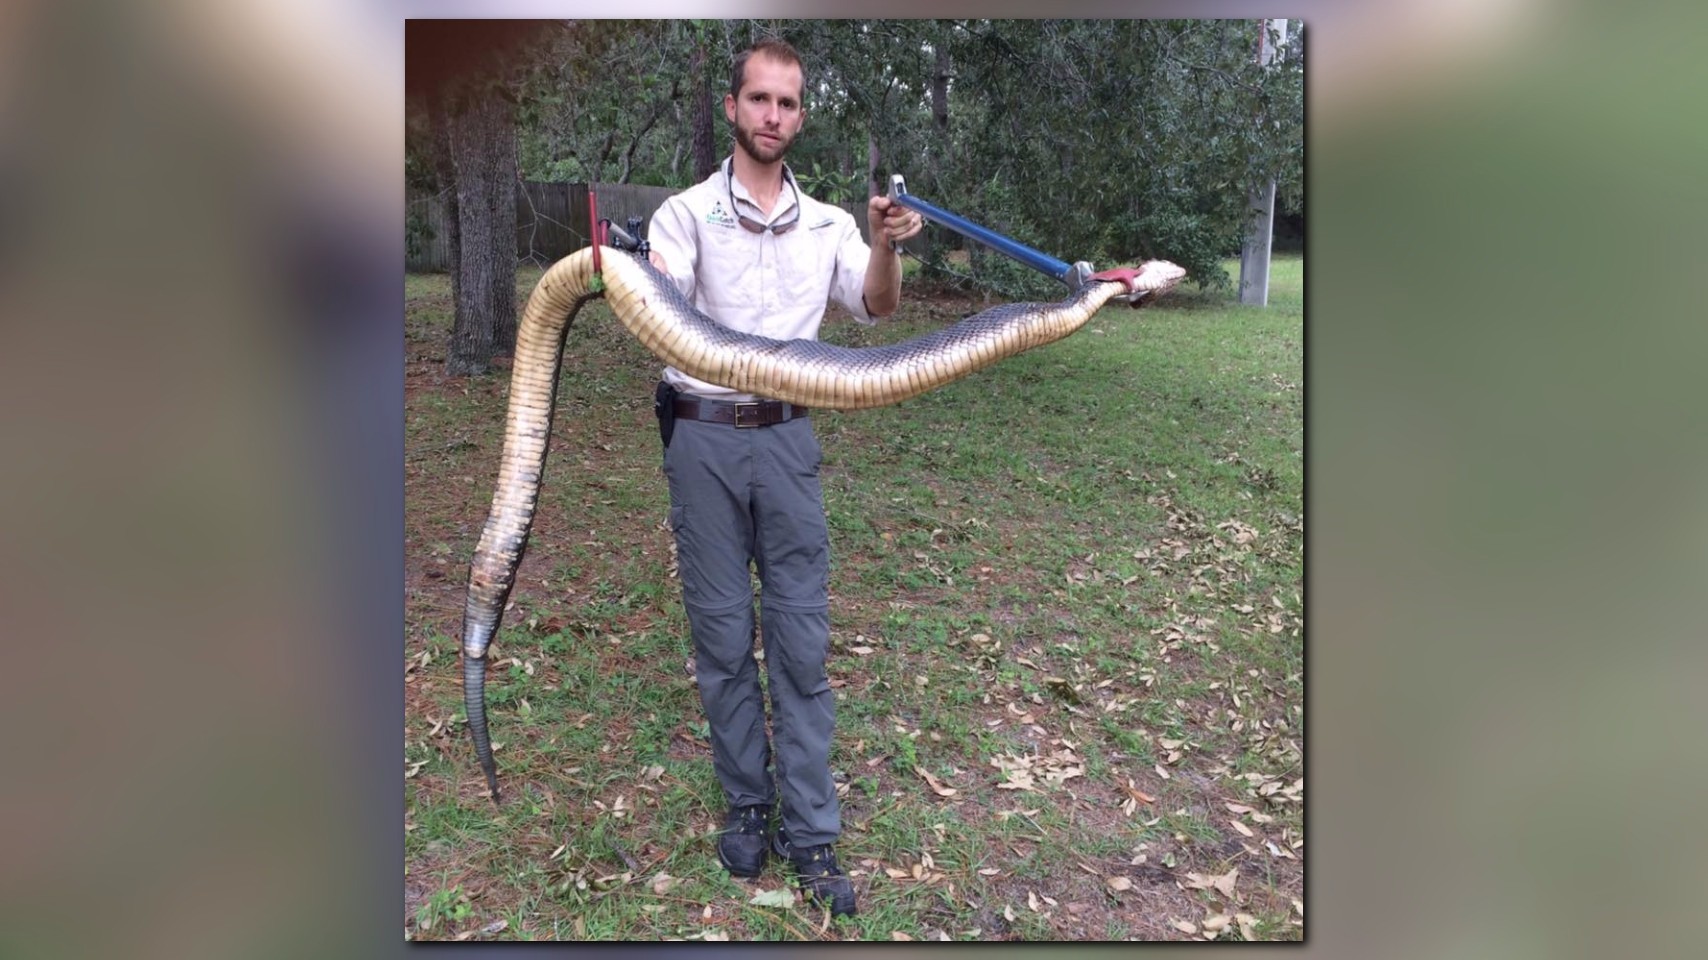 Giant water moccasin nabbed in Florida | 11alive.com